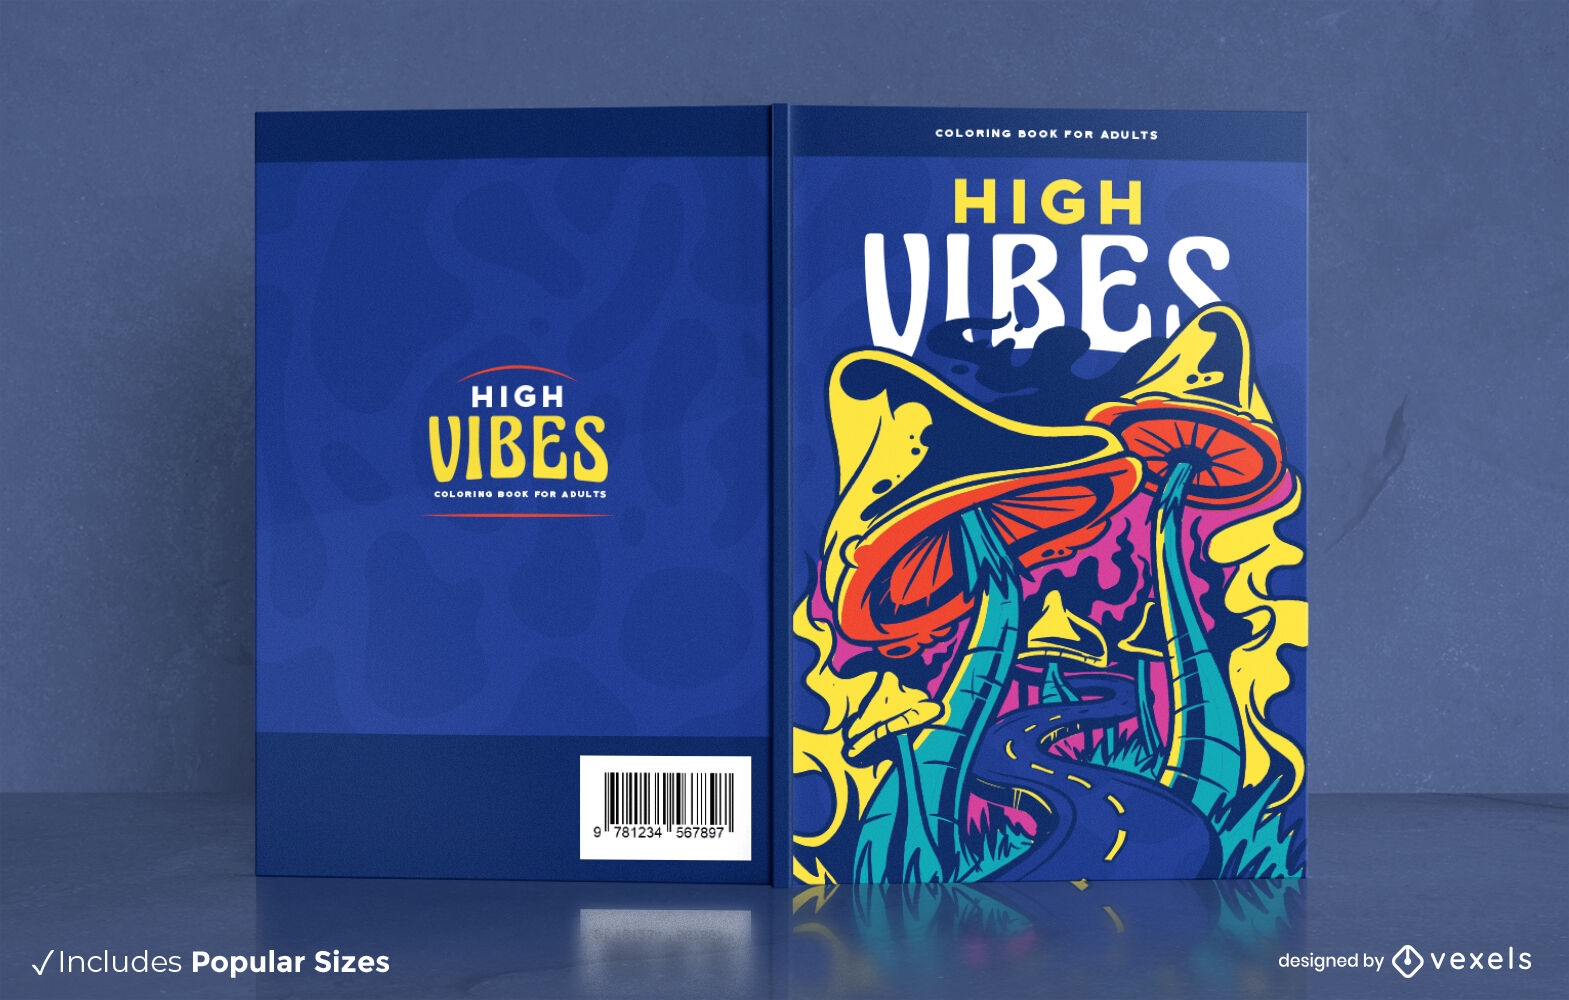 High vibes book cover design